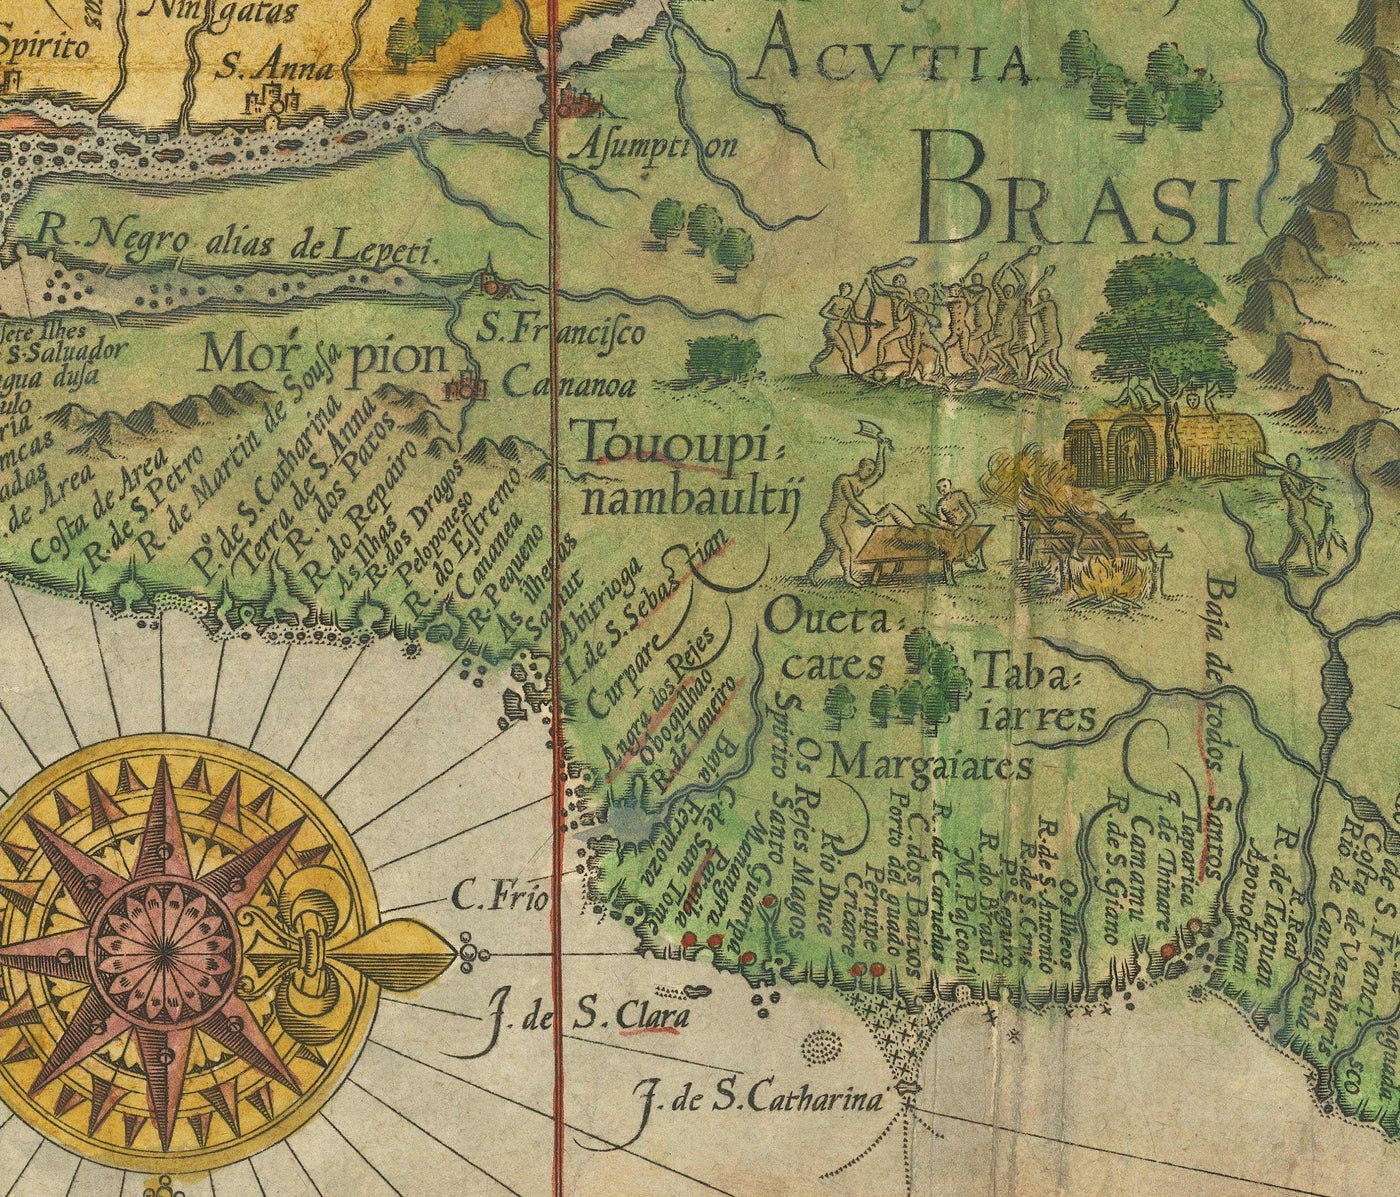 Old Map of South America by Linschoten, 1596 - Brazil, Peru, Chile, Caribbean, Florida, Spanish & Portuguese Colonies